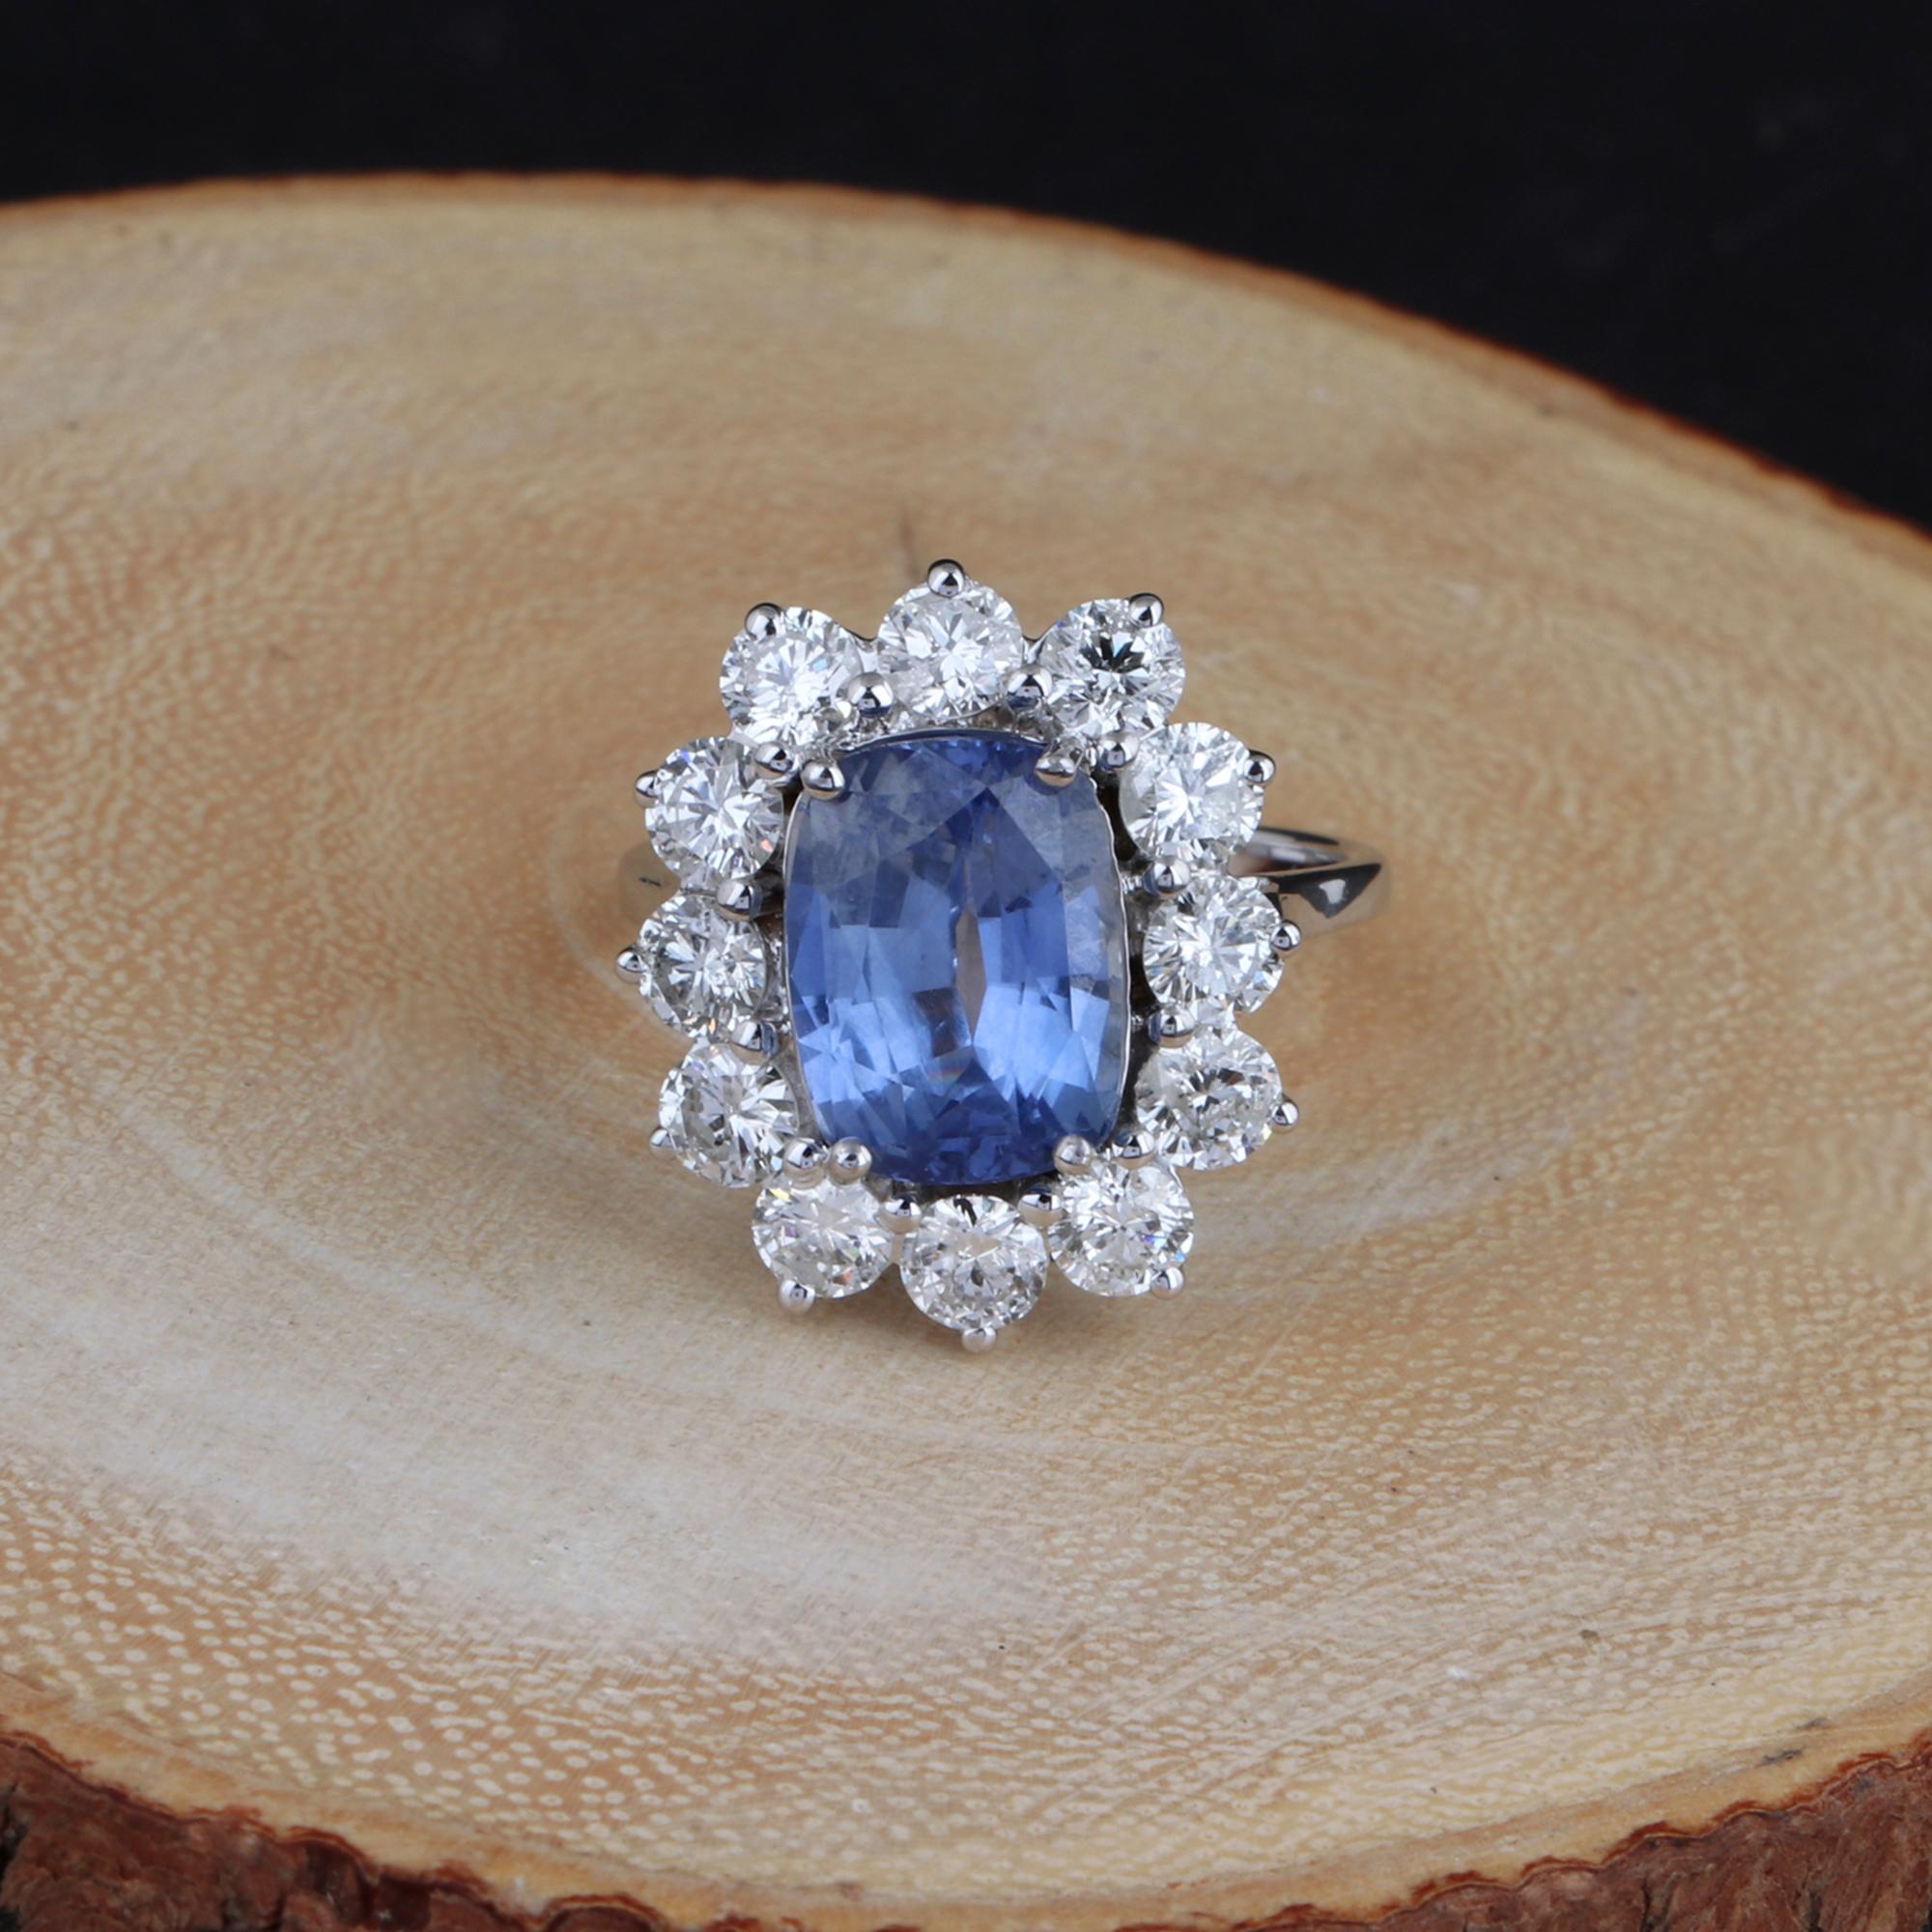 For Sale:  Blue Sapphire Gemstone Cocktail Ring Diamond 18 Kt White Gold Handmade Jewelry 4